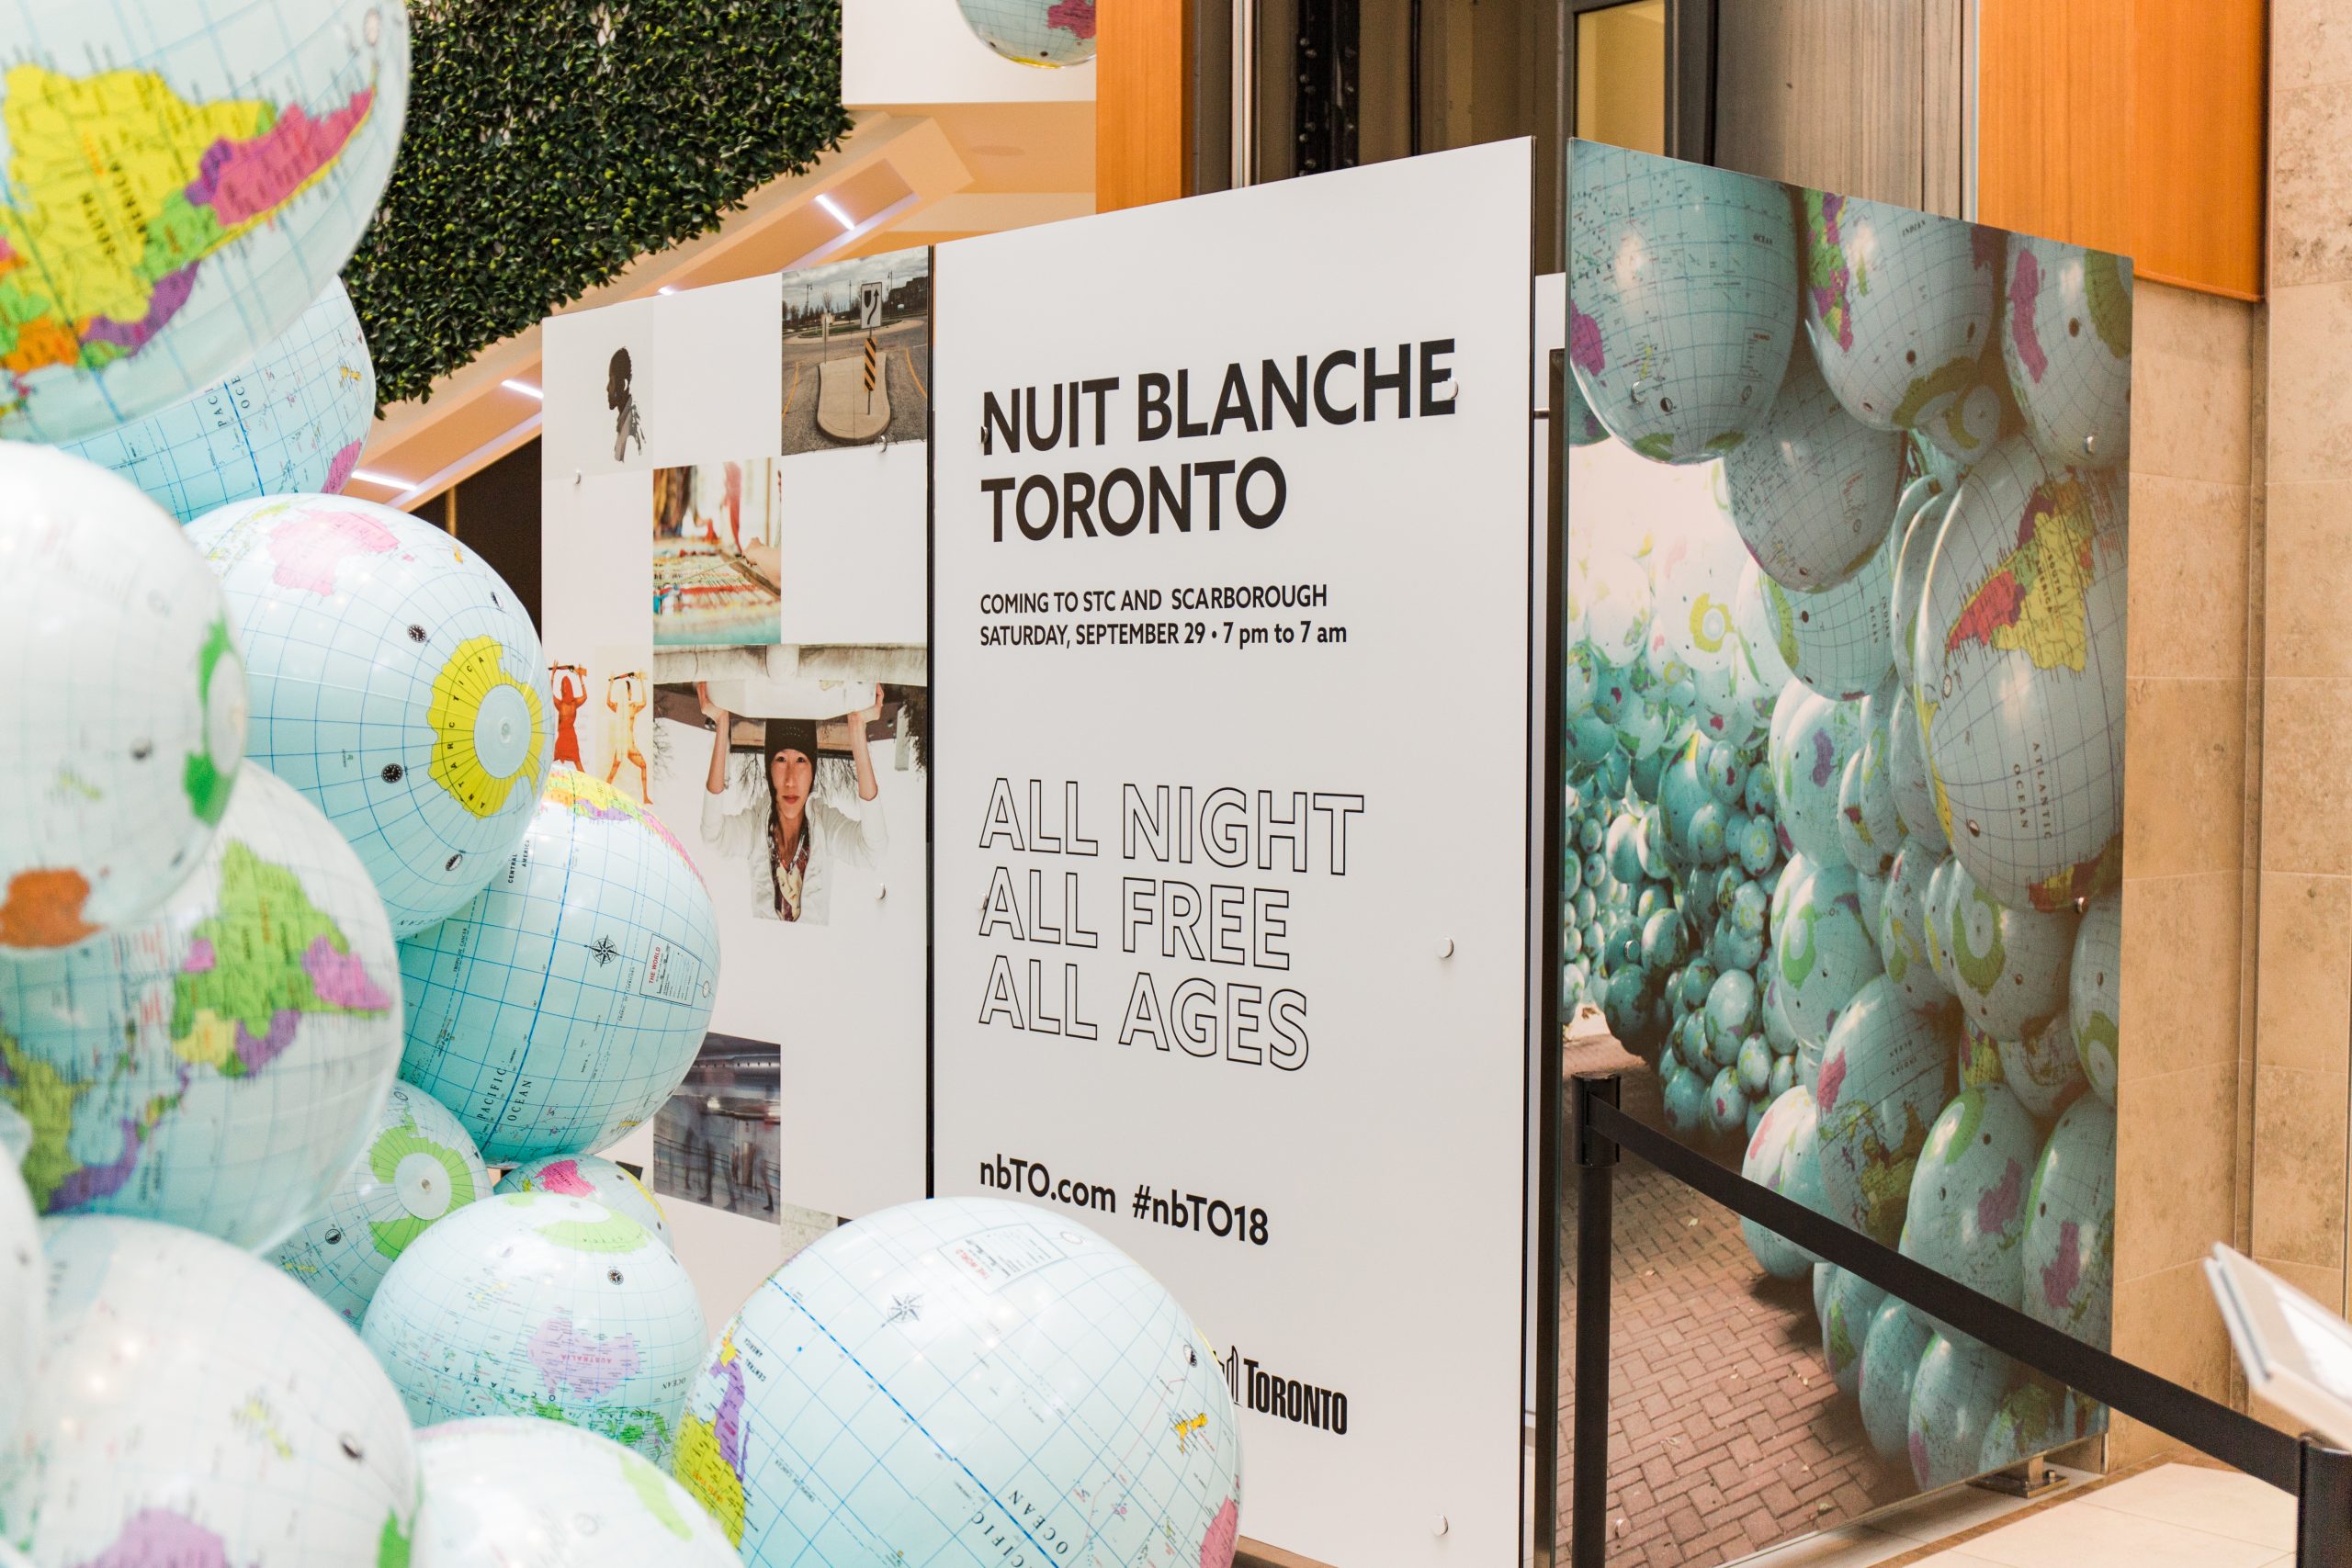 Nuit Blanche at STC